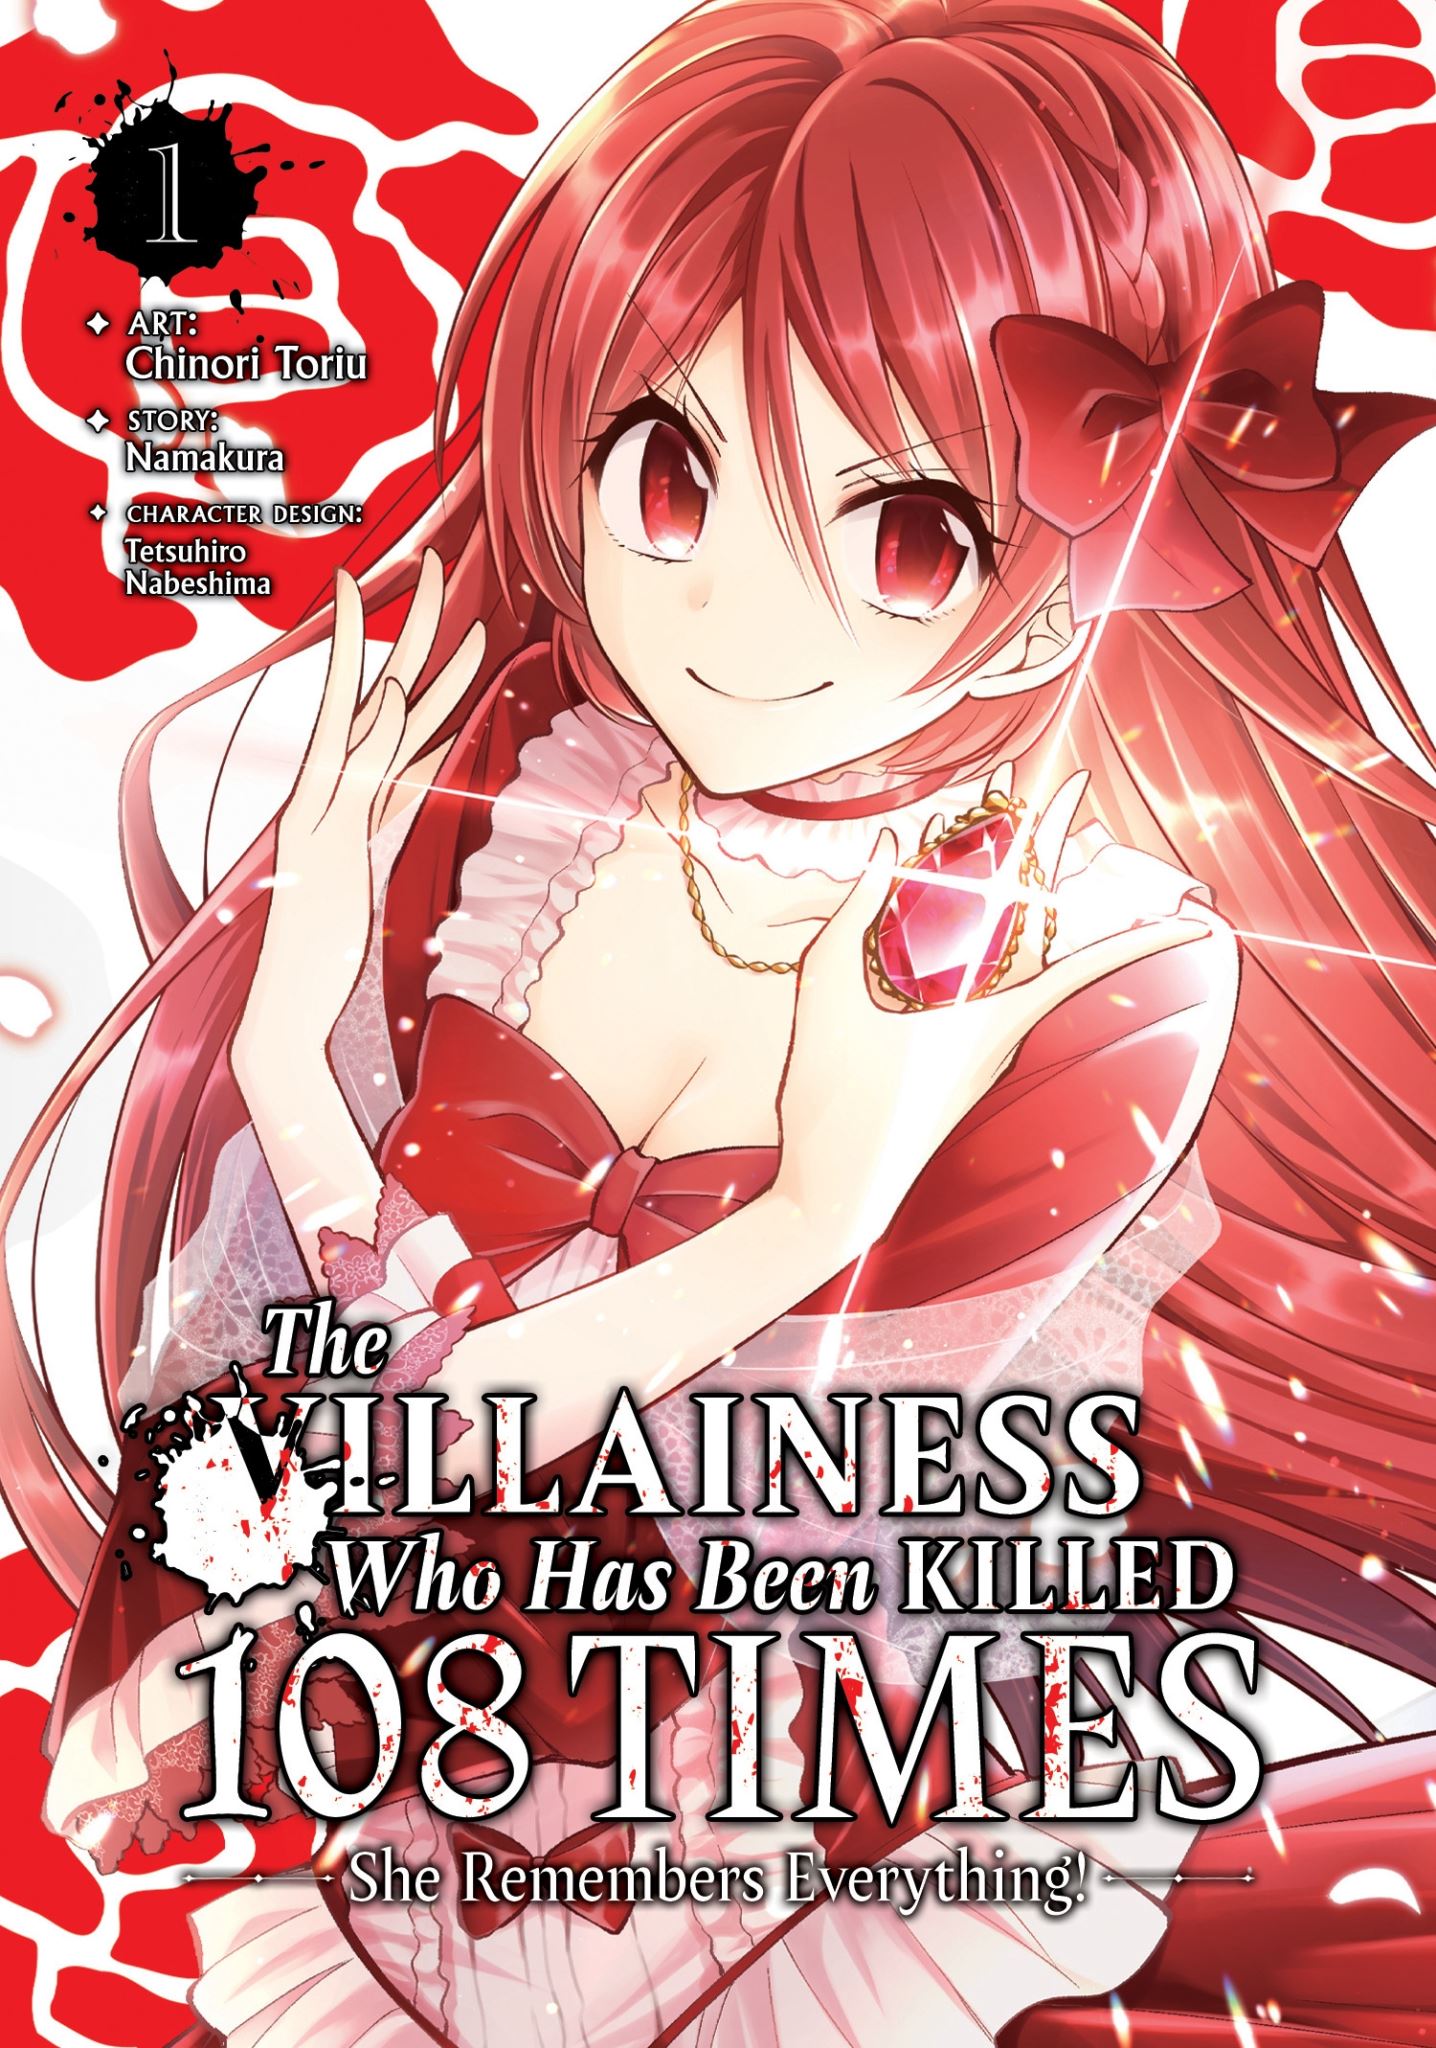 The Villainess Who Has Been Killed 108 Times: She Remembers Everything! (Manga)